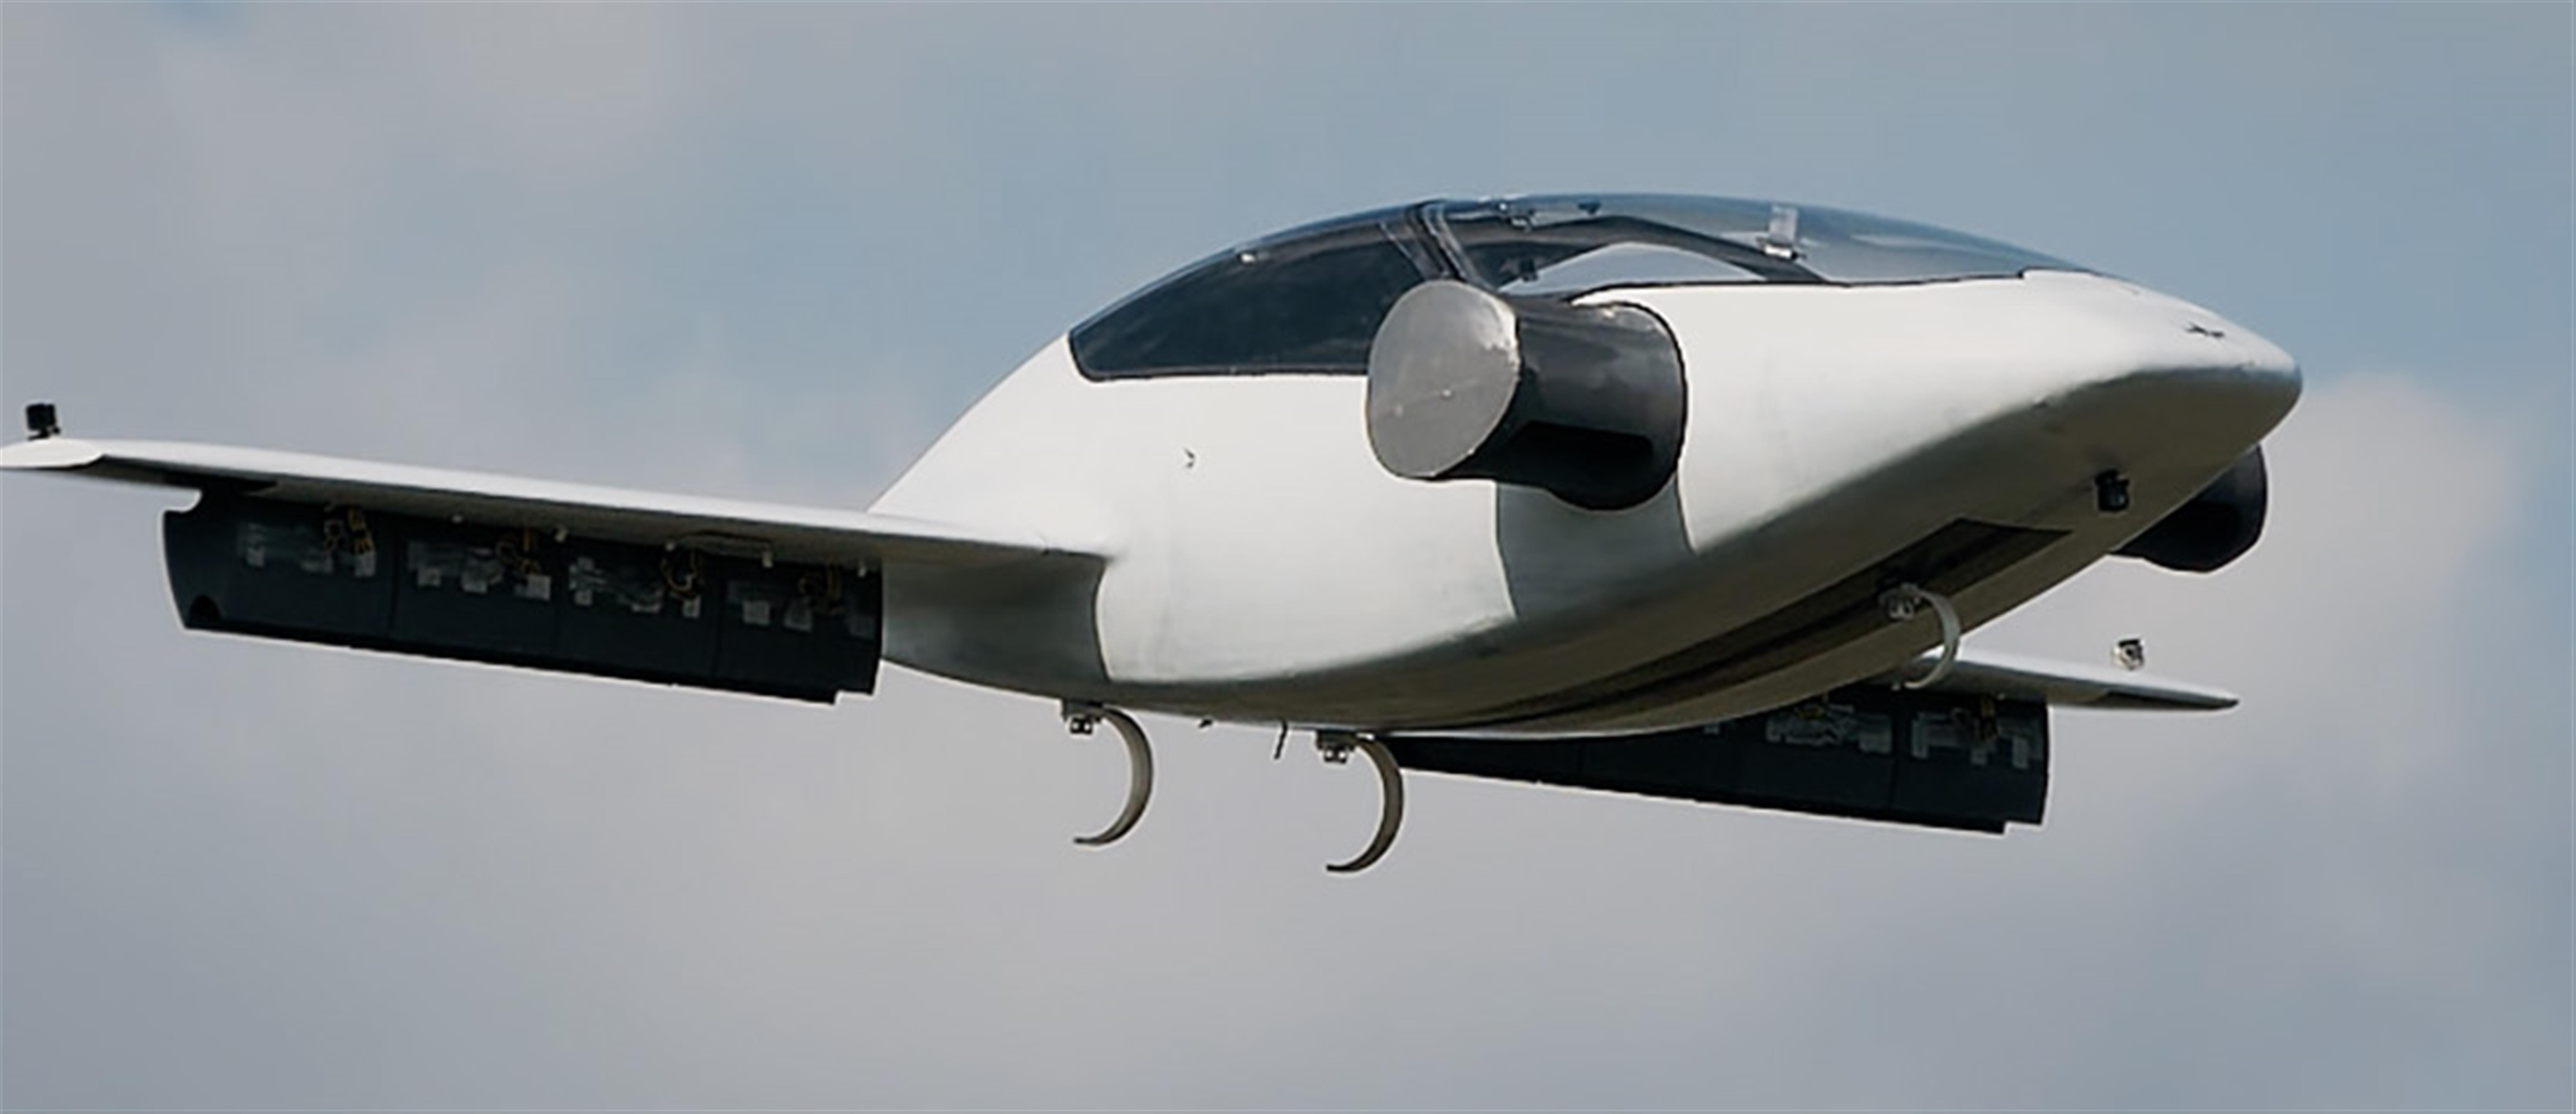 About the future of the Flying Cars